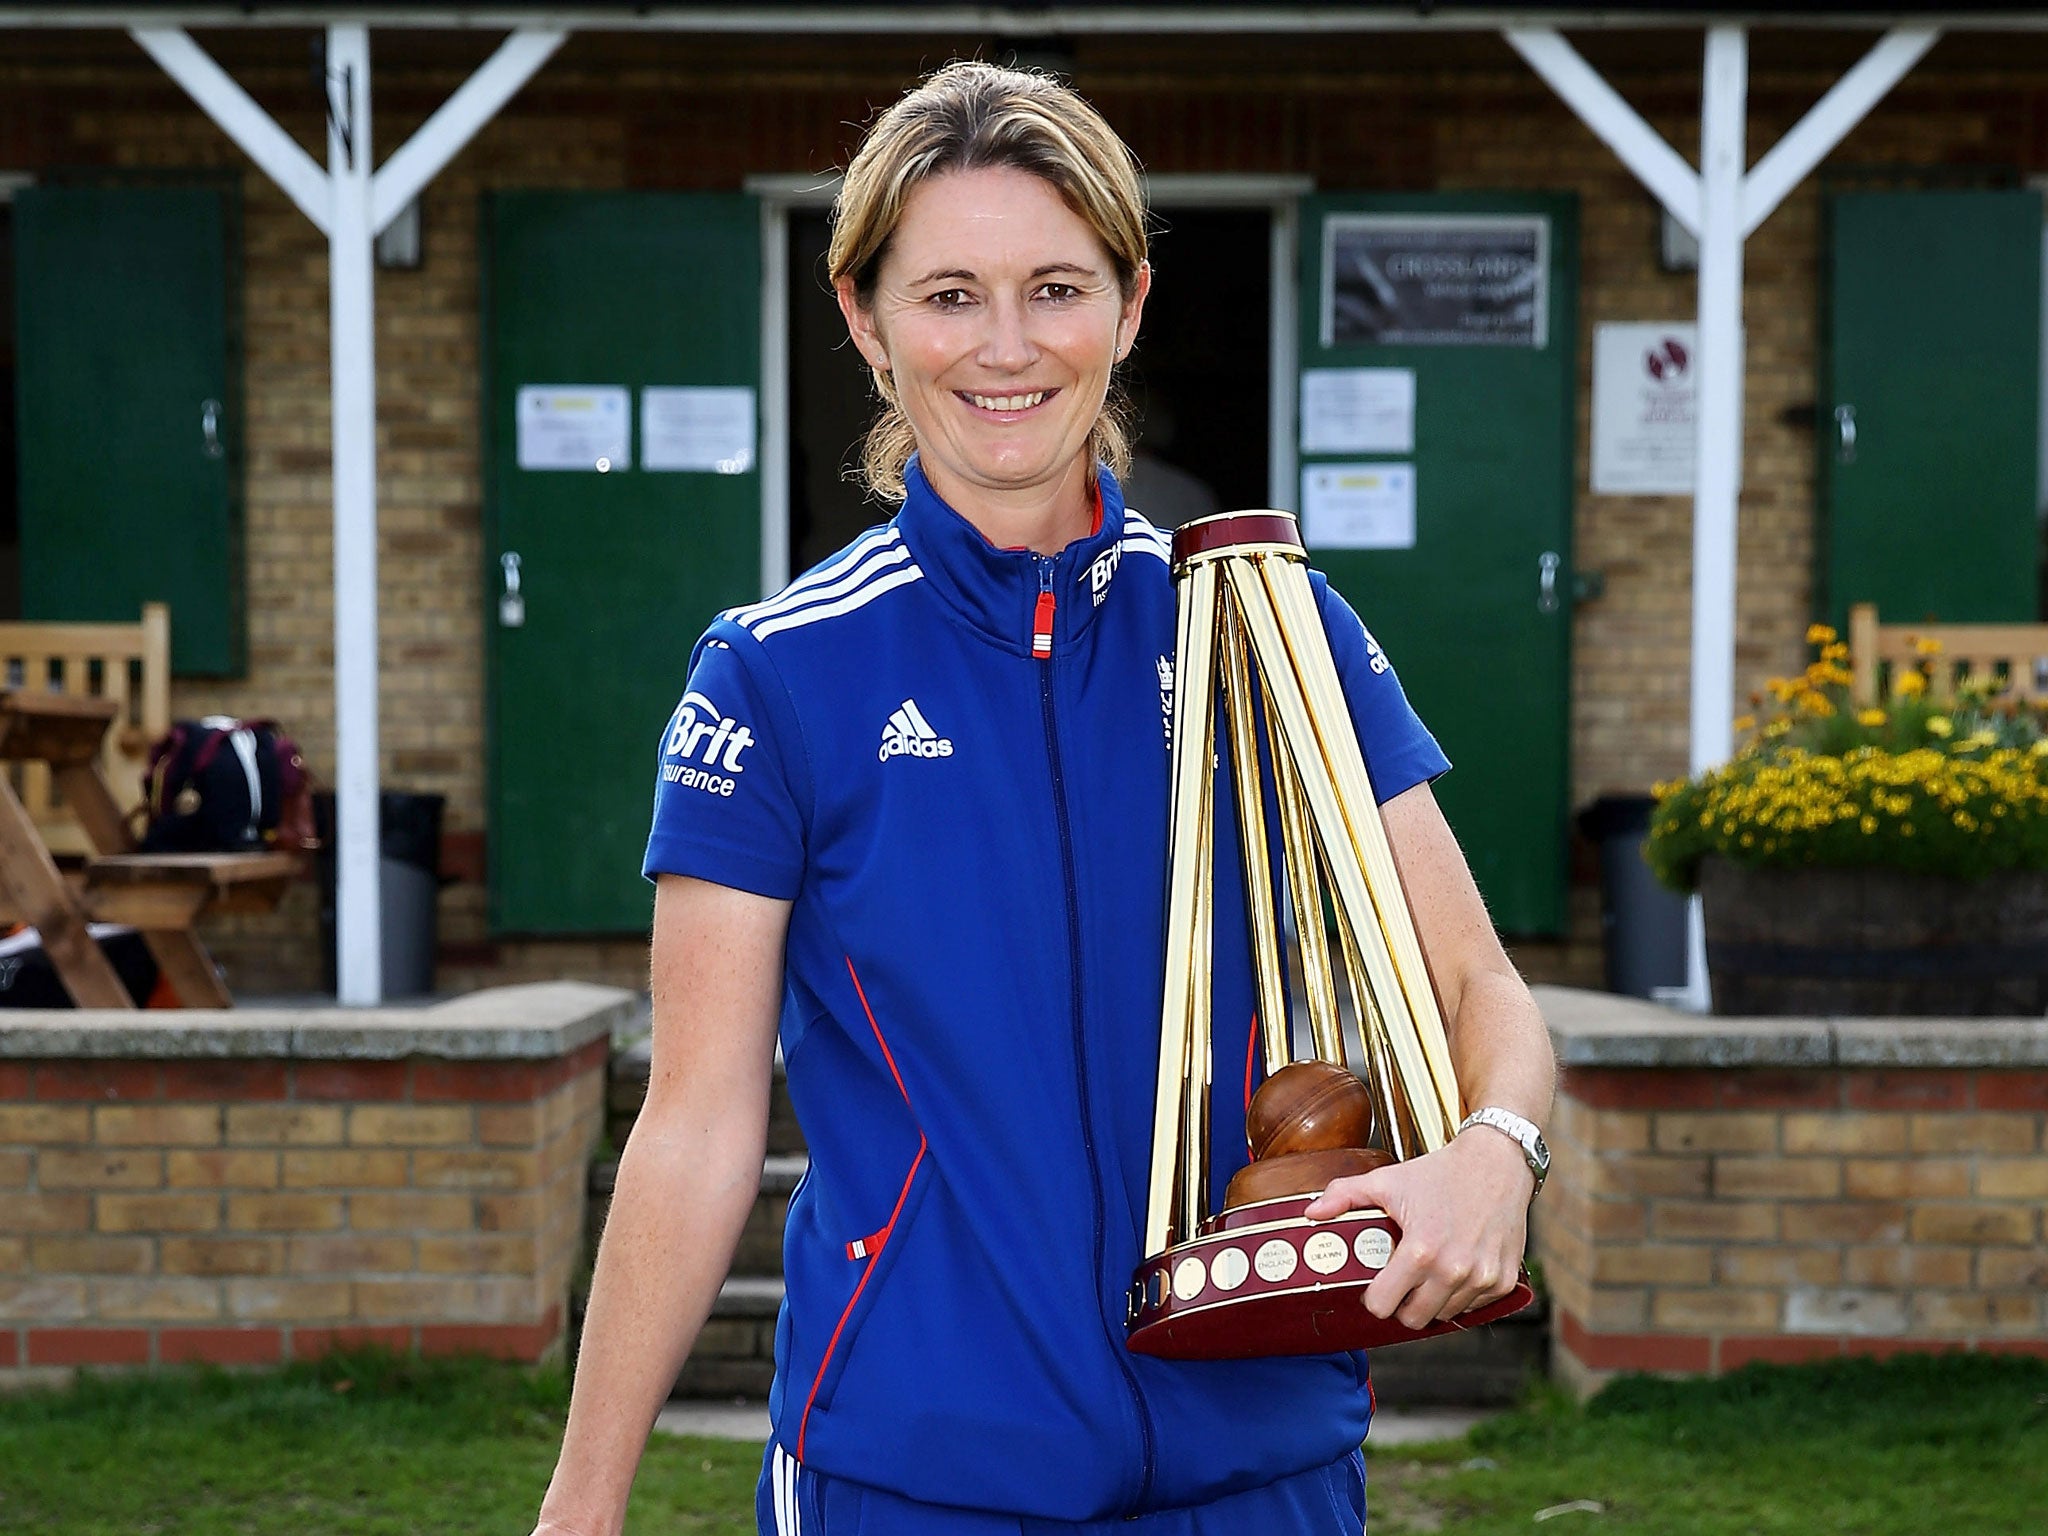 The England captain Charlotte Edwards with the Ashes trophy